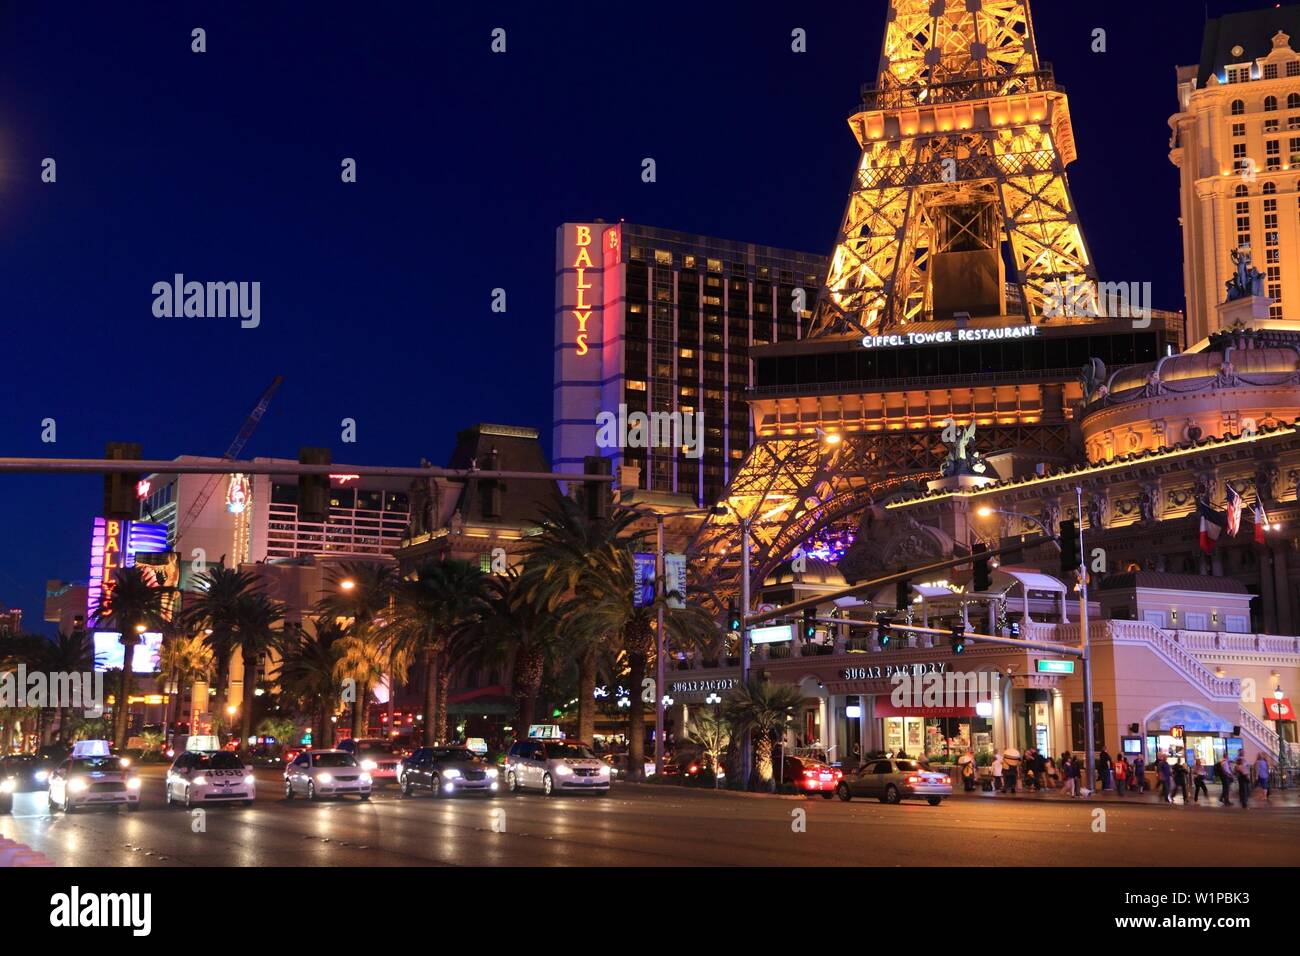 LAS VEGAS, USA - APRIL 14, 2014: People visit the famous Strip in Las Vegas. 15 of 25 largest hotels in the world are located at the strip with more t Stock Photo